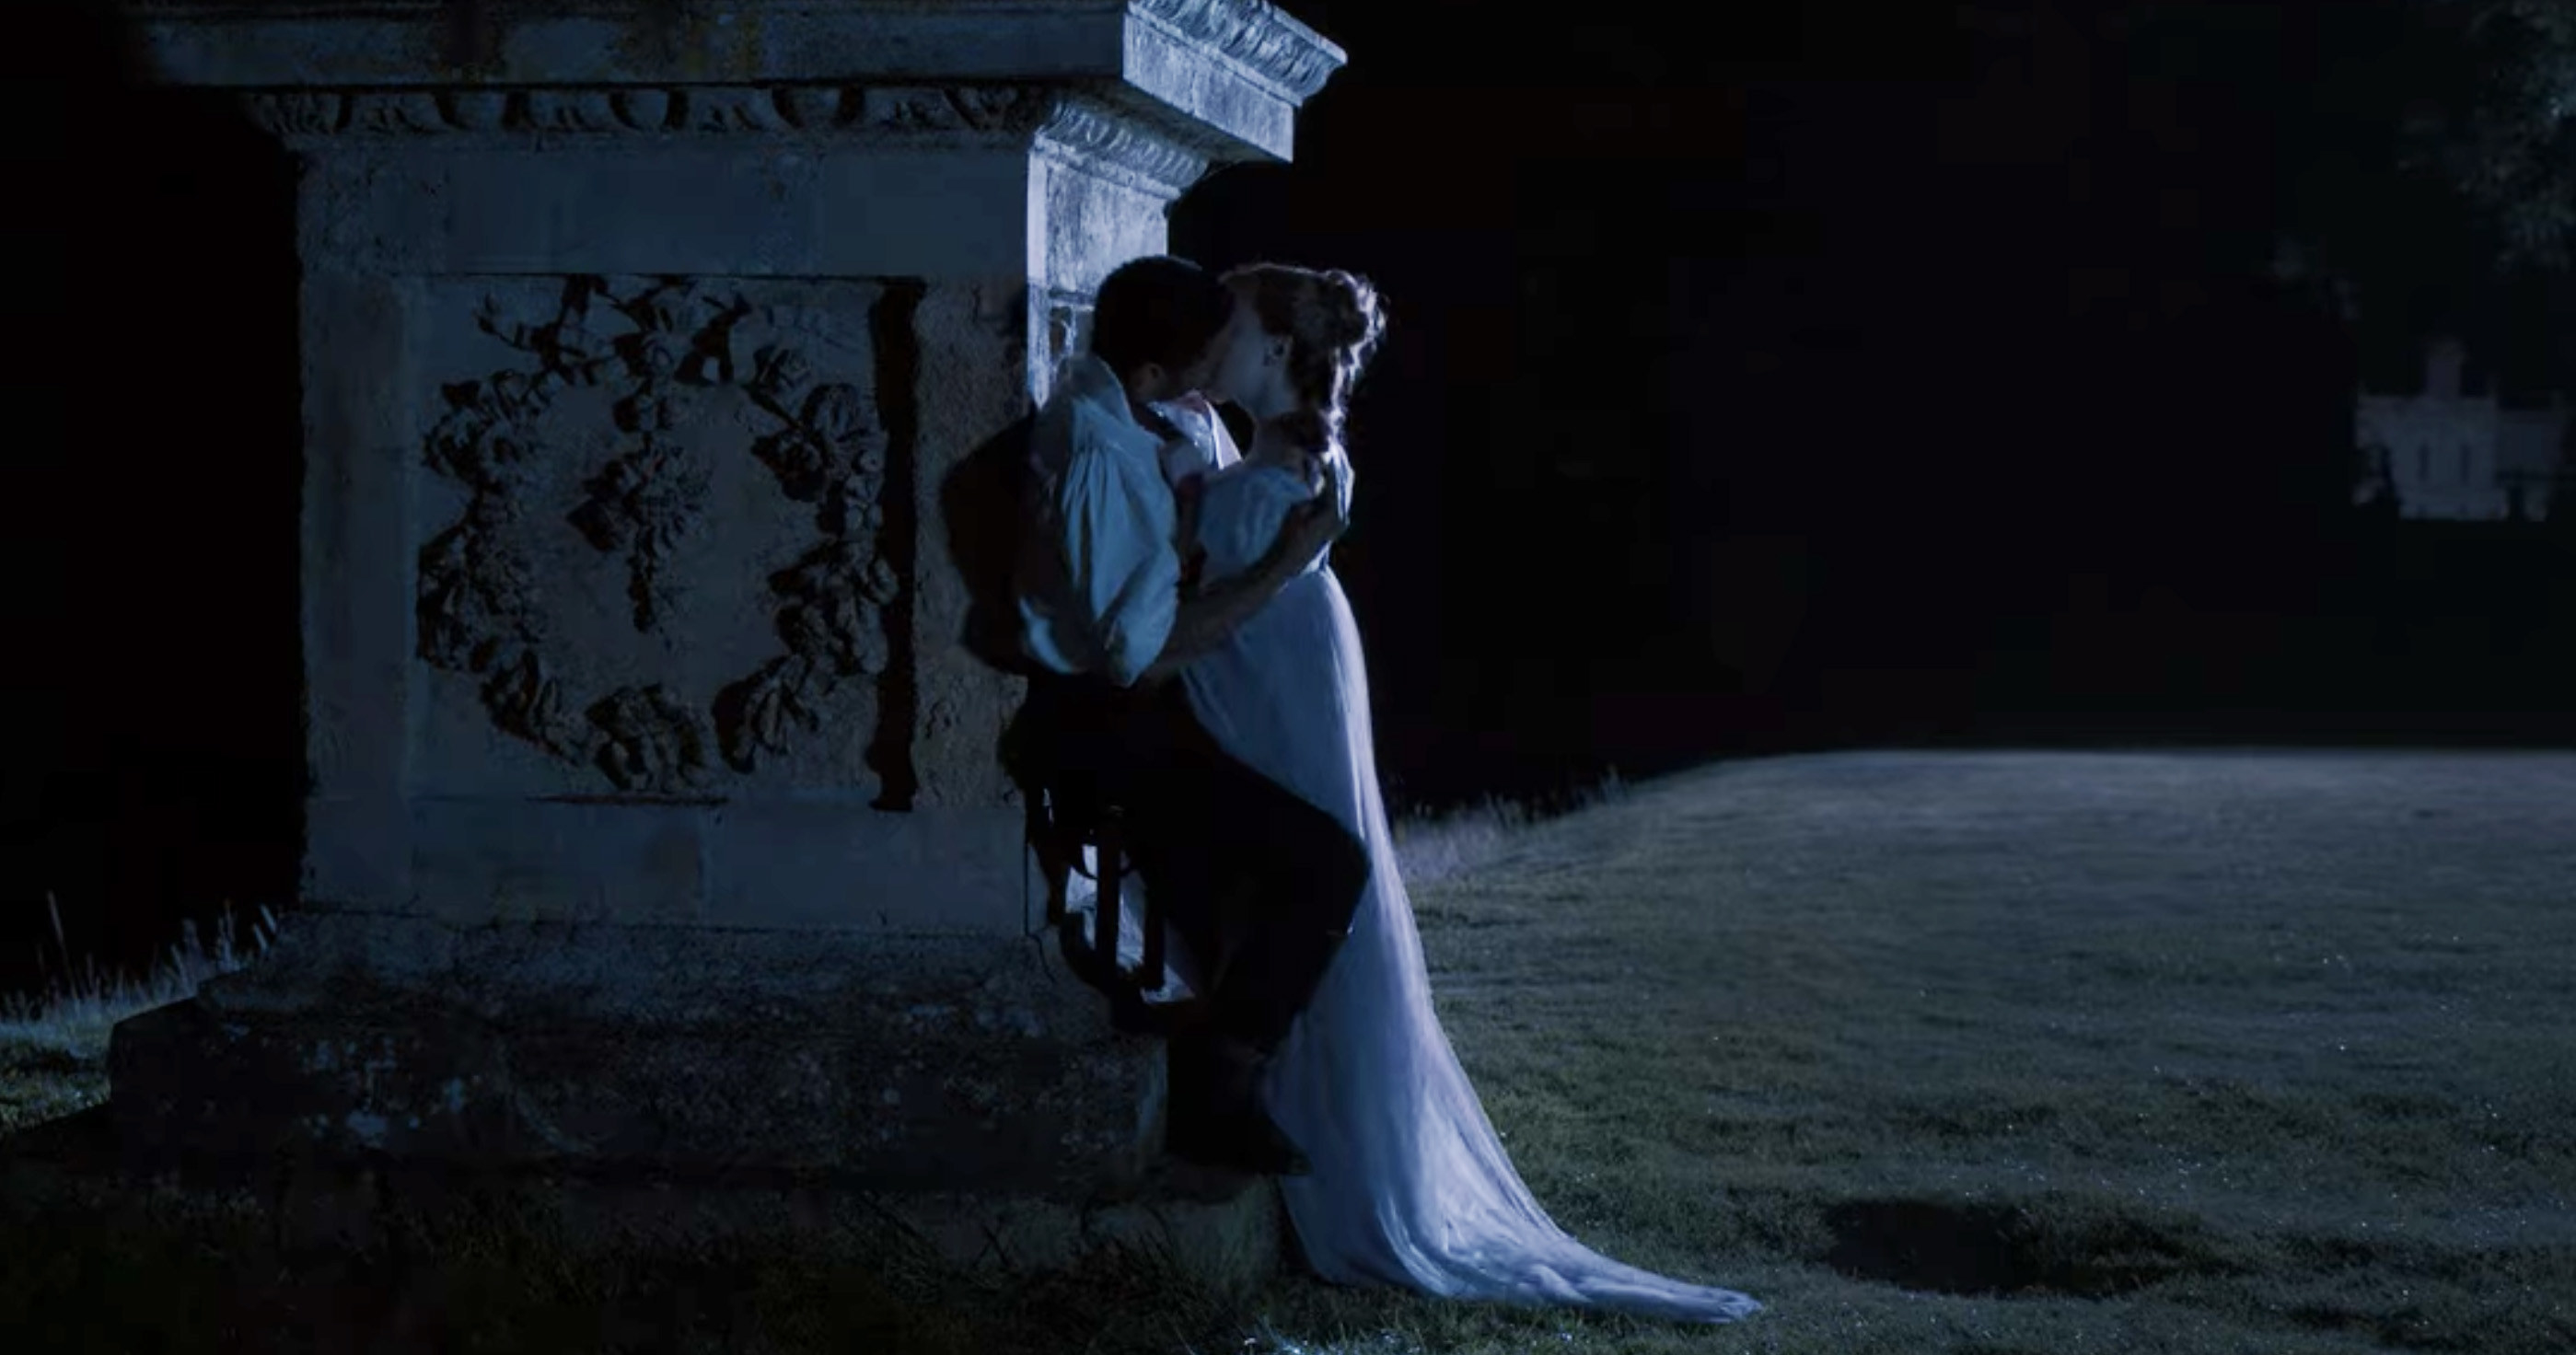 Simon and Daphne passionately kissing against a statue outside